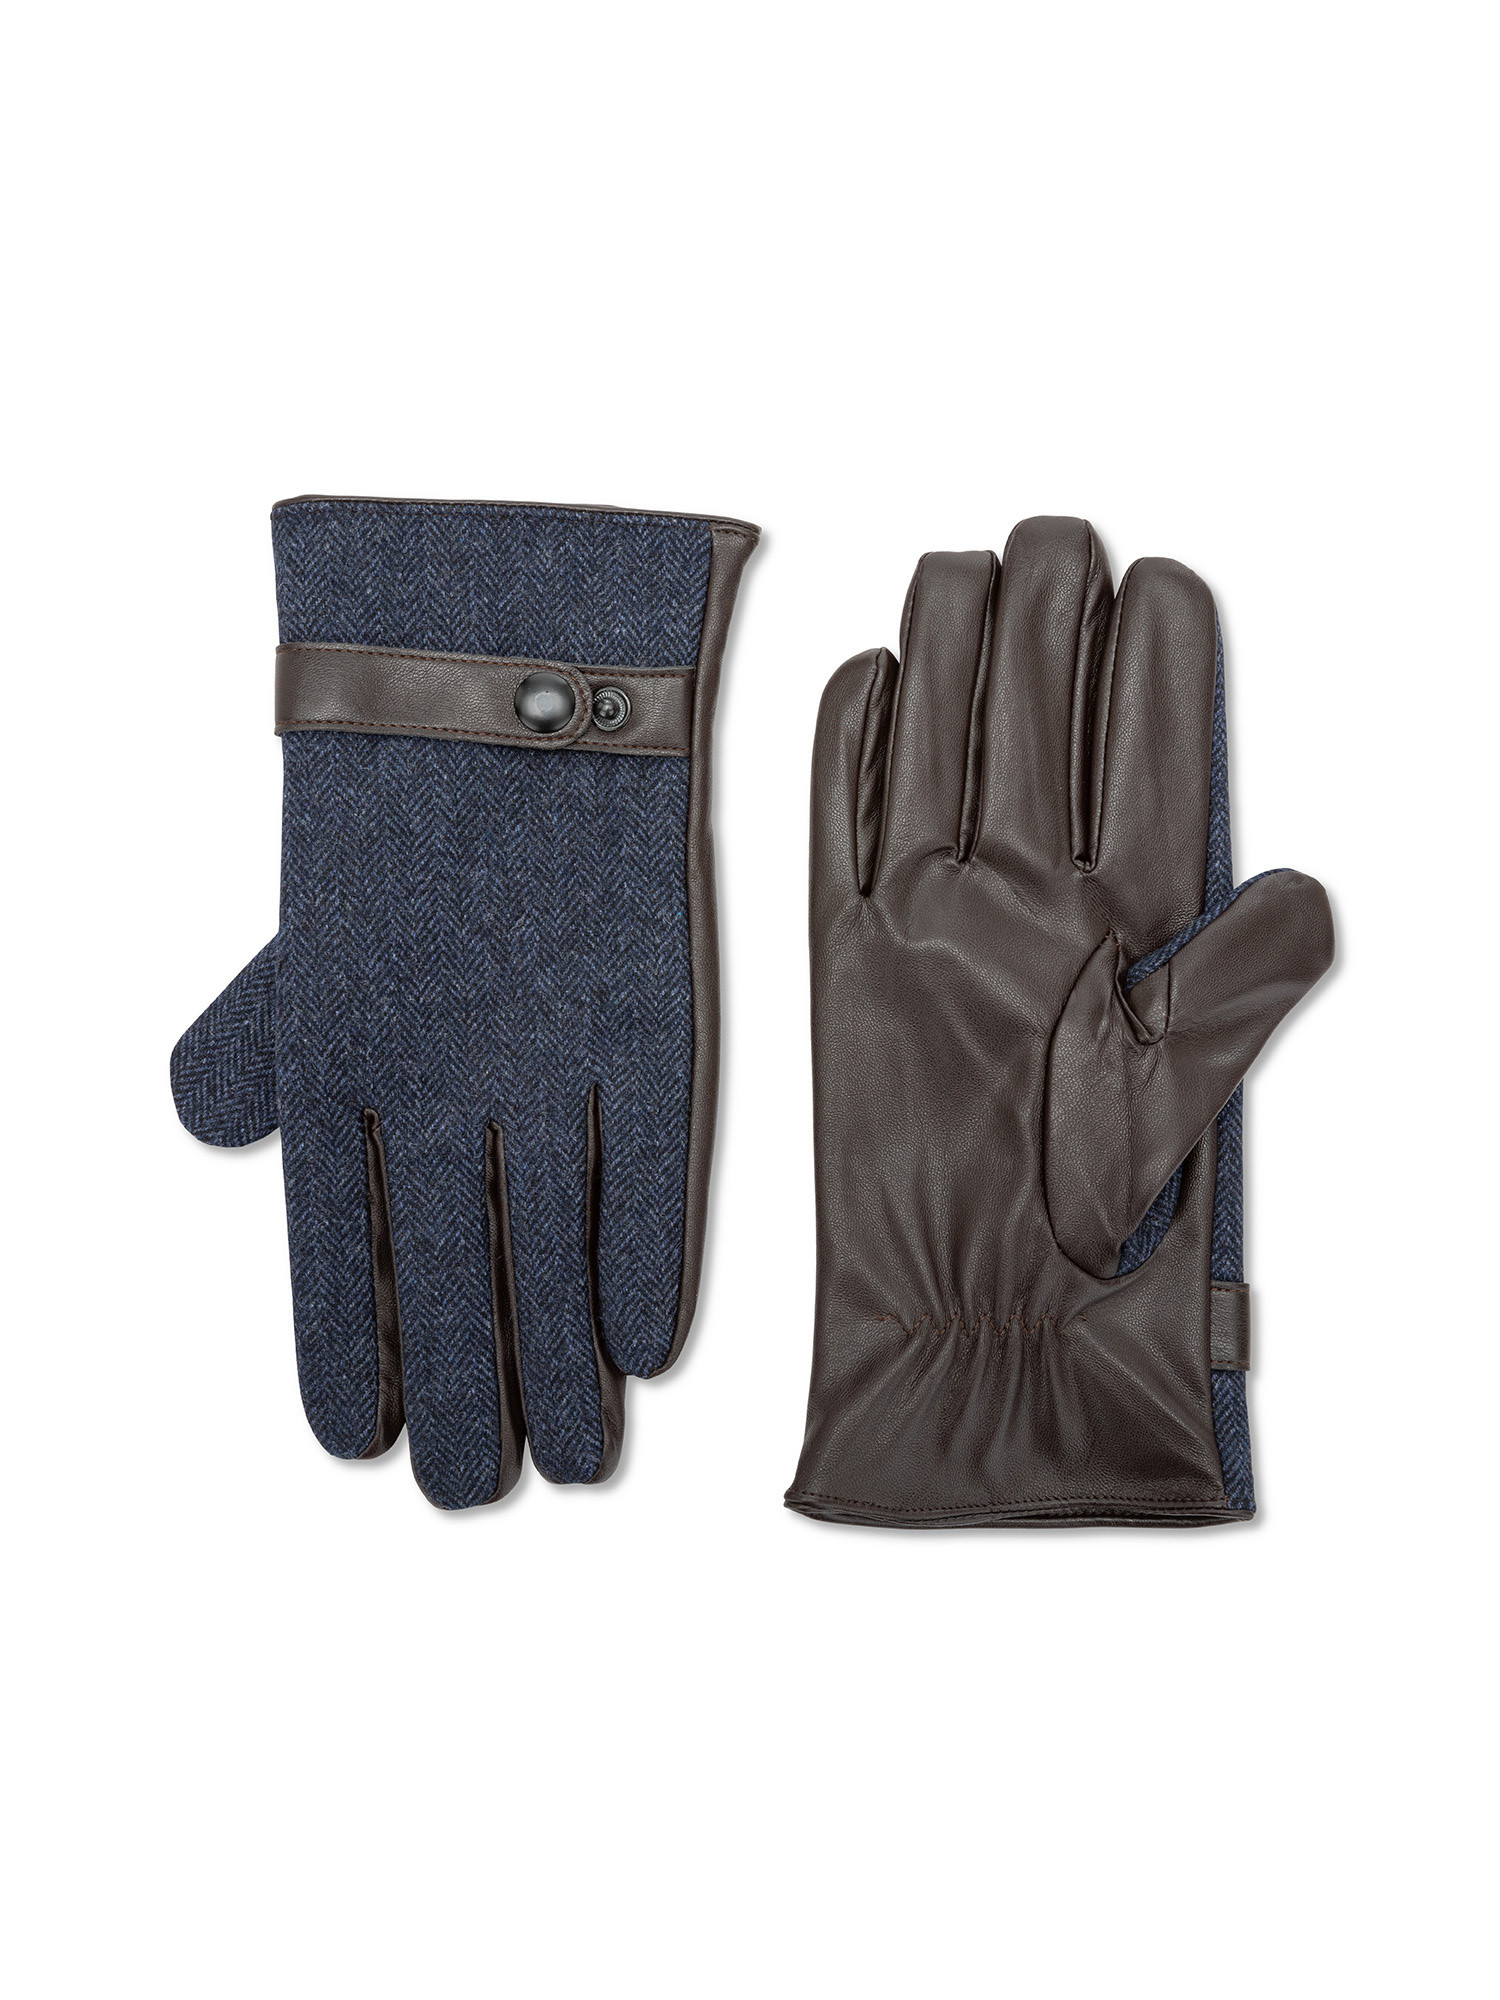 Luca D'Altieri - Gloves with strap, Blue, large image number 0